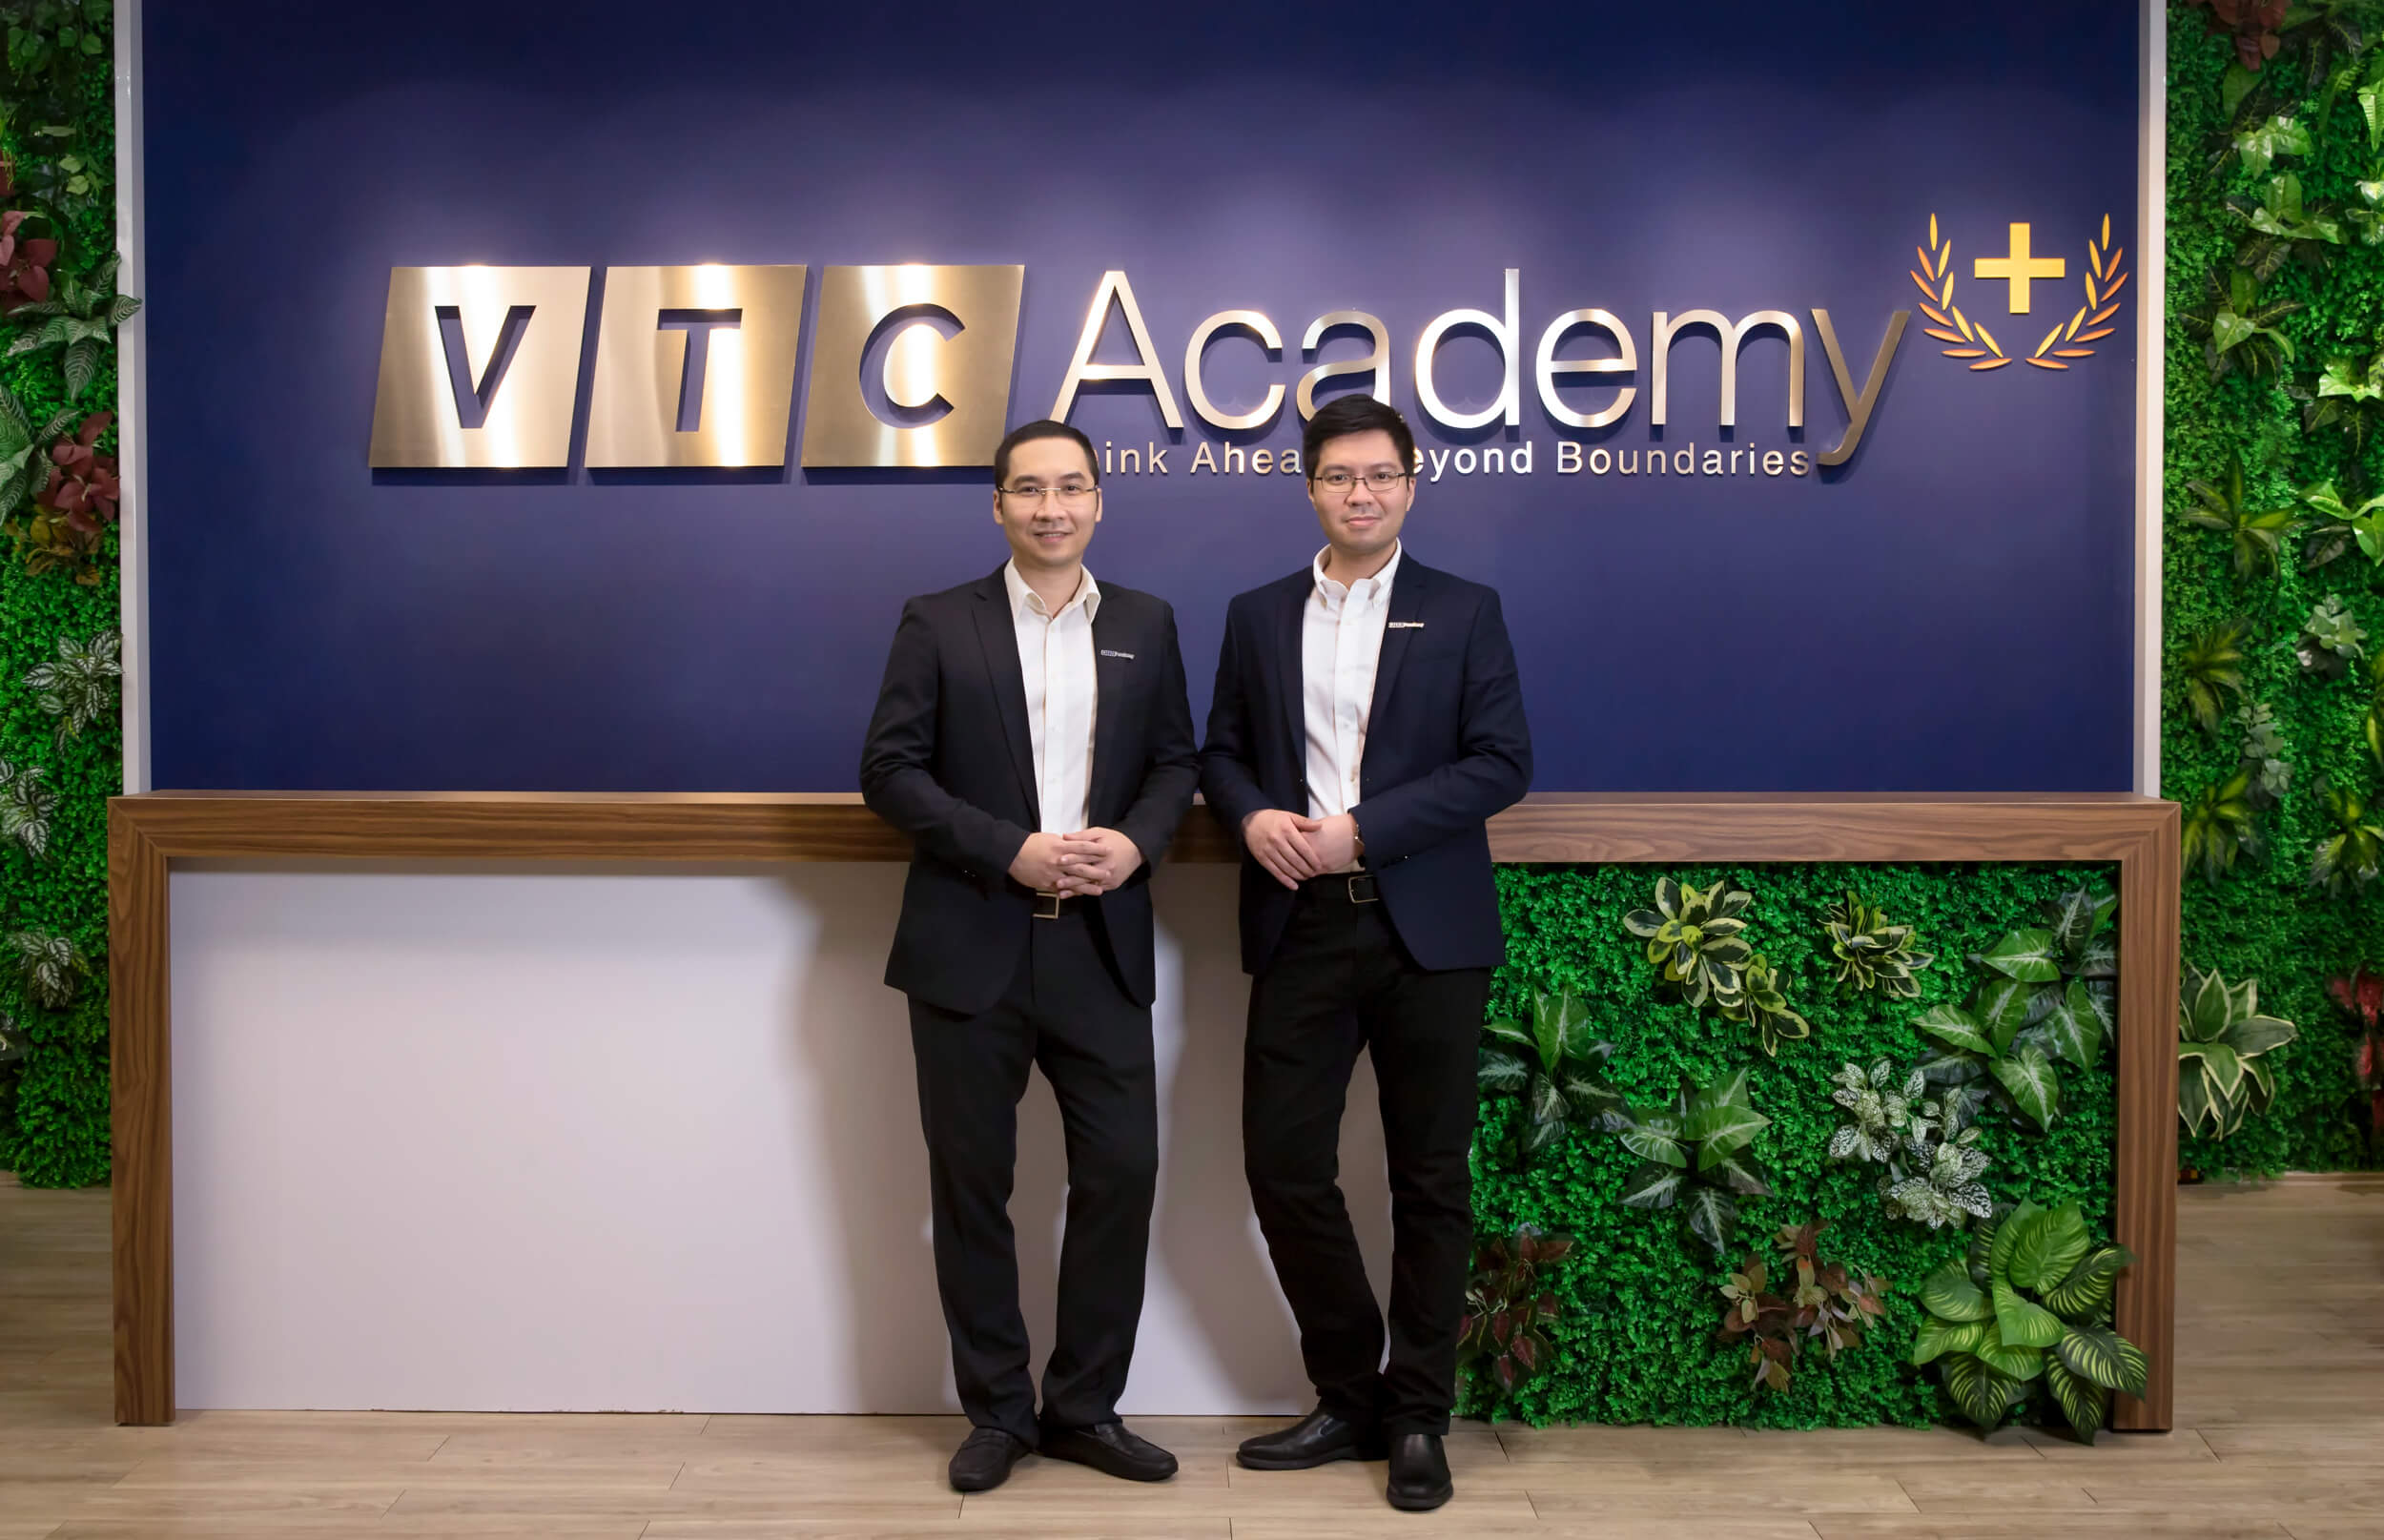 VTC Academy pursues up to $20 million USD for long term growth at digital academic ecosystem